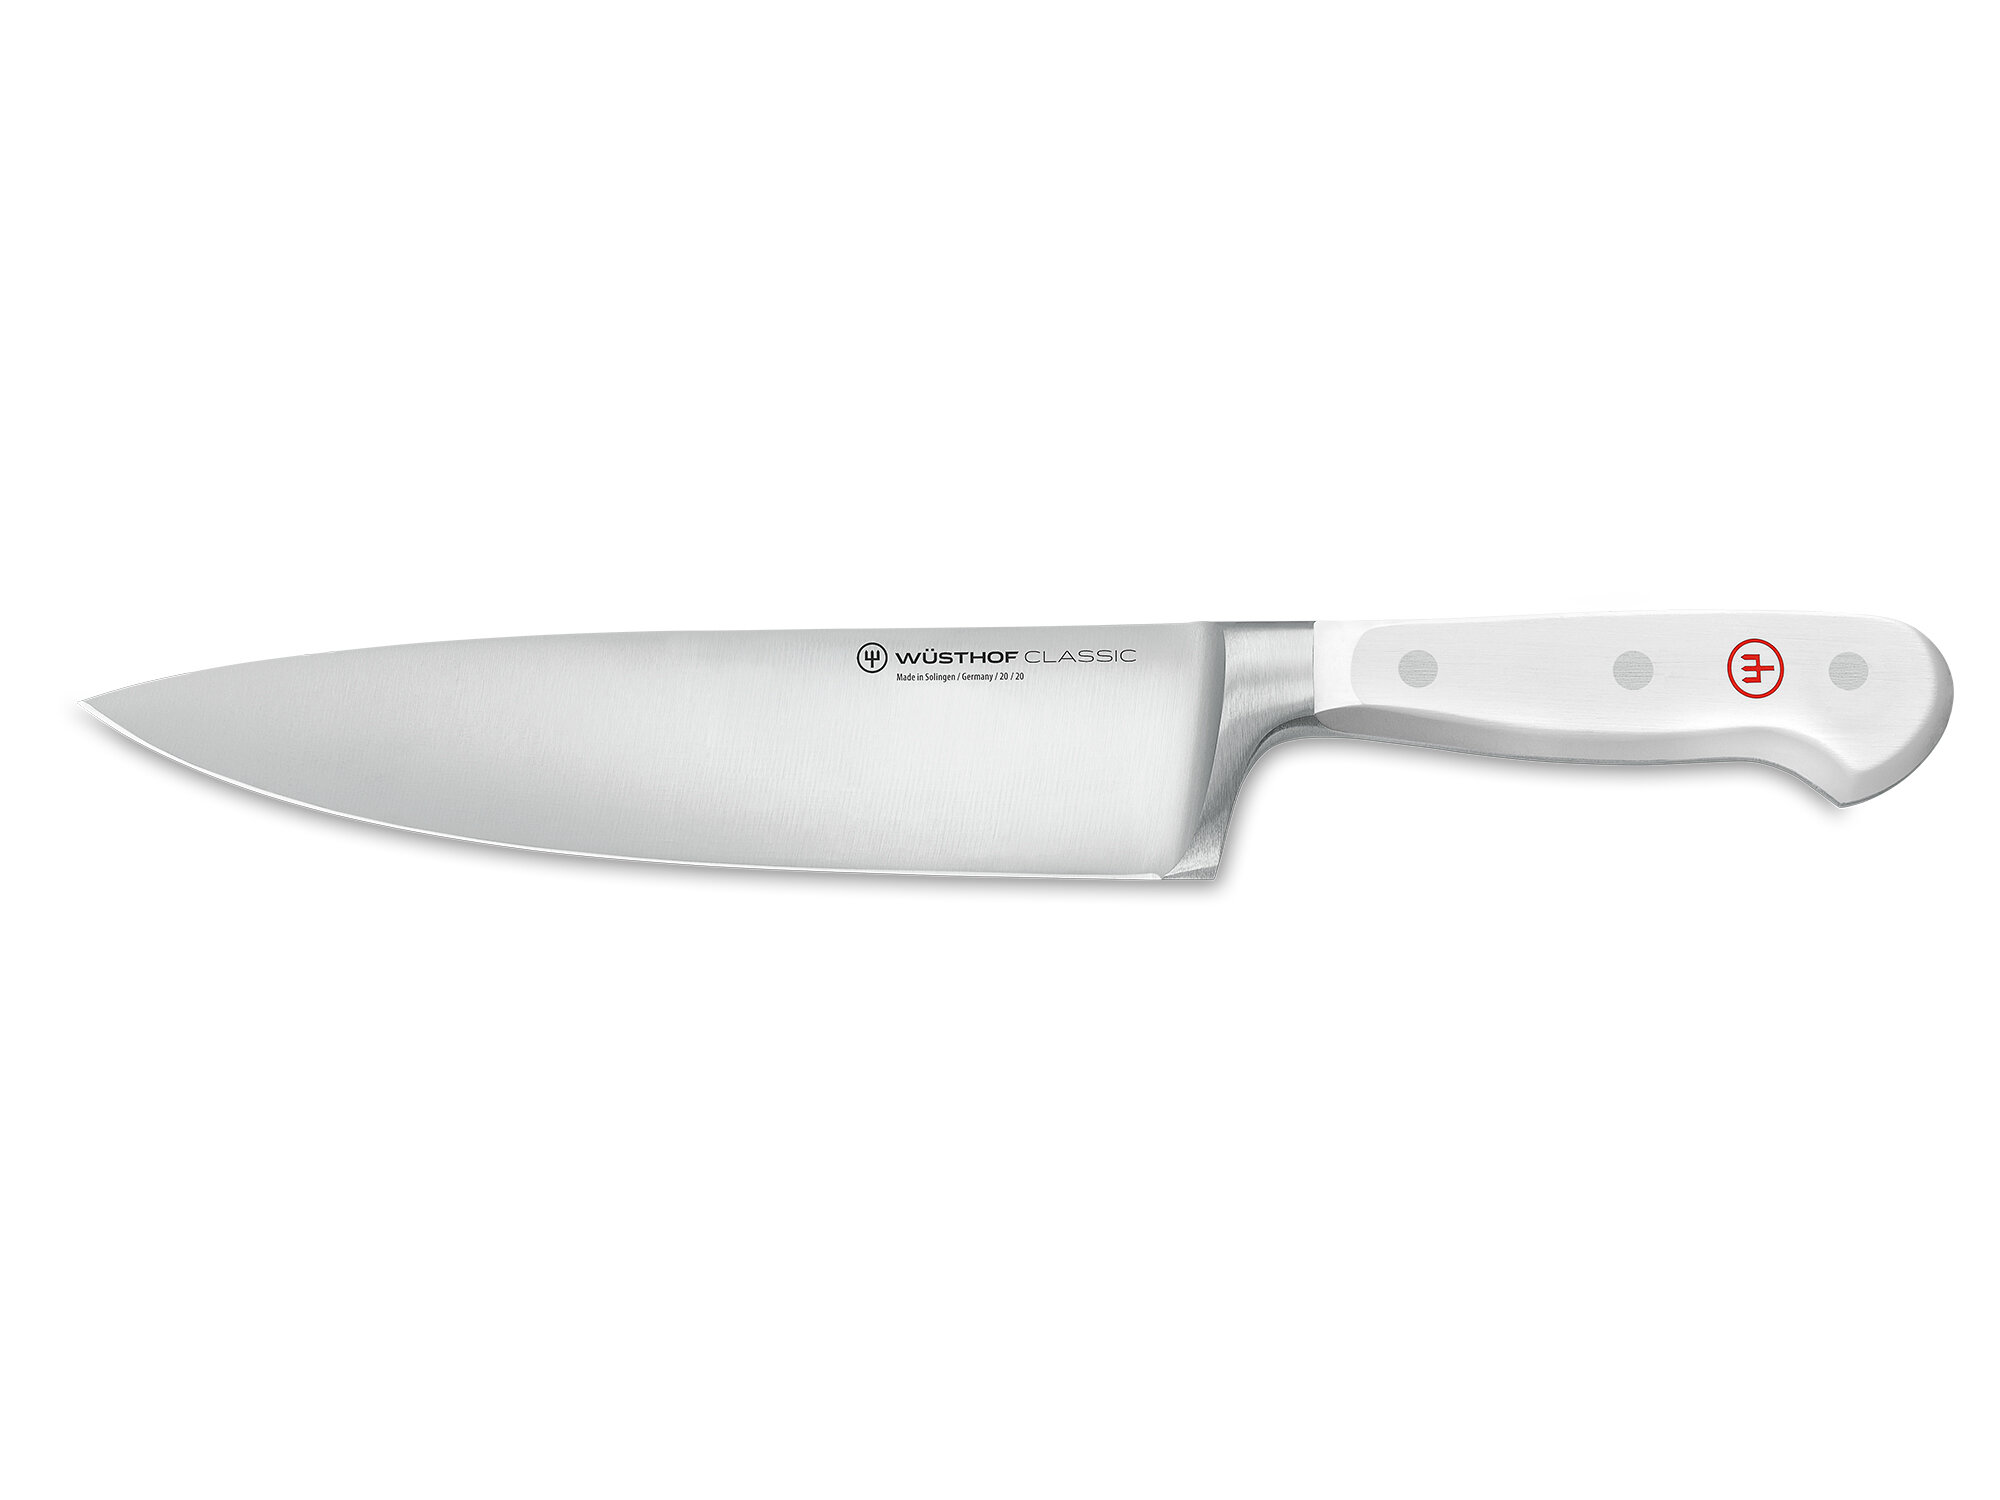 Basics Classic 8-inch Chef's Knife with Three Rivets, Silver